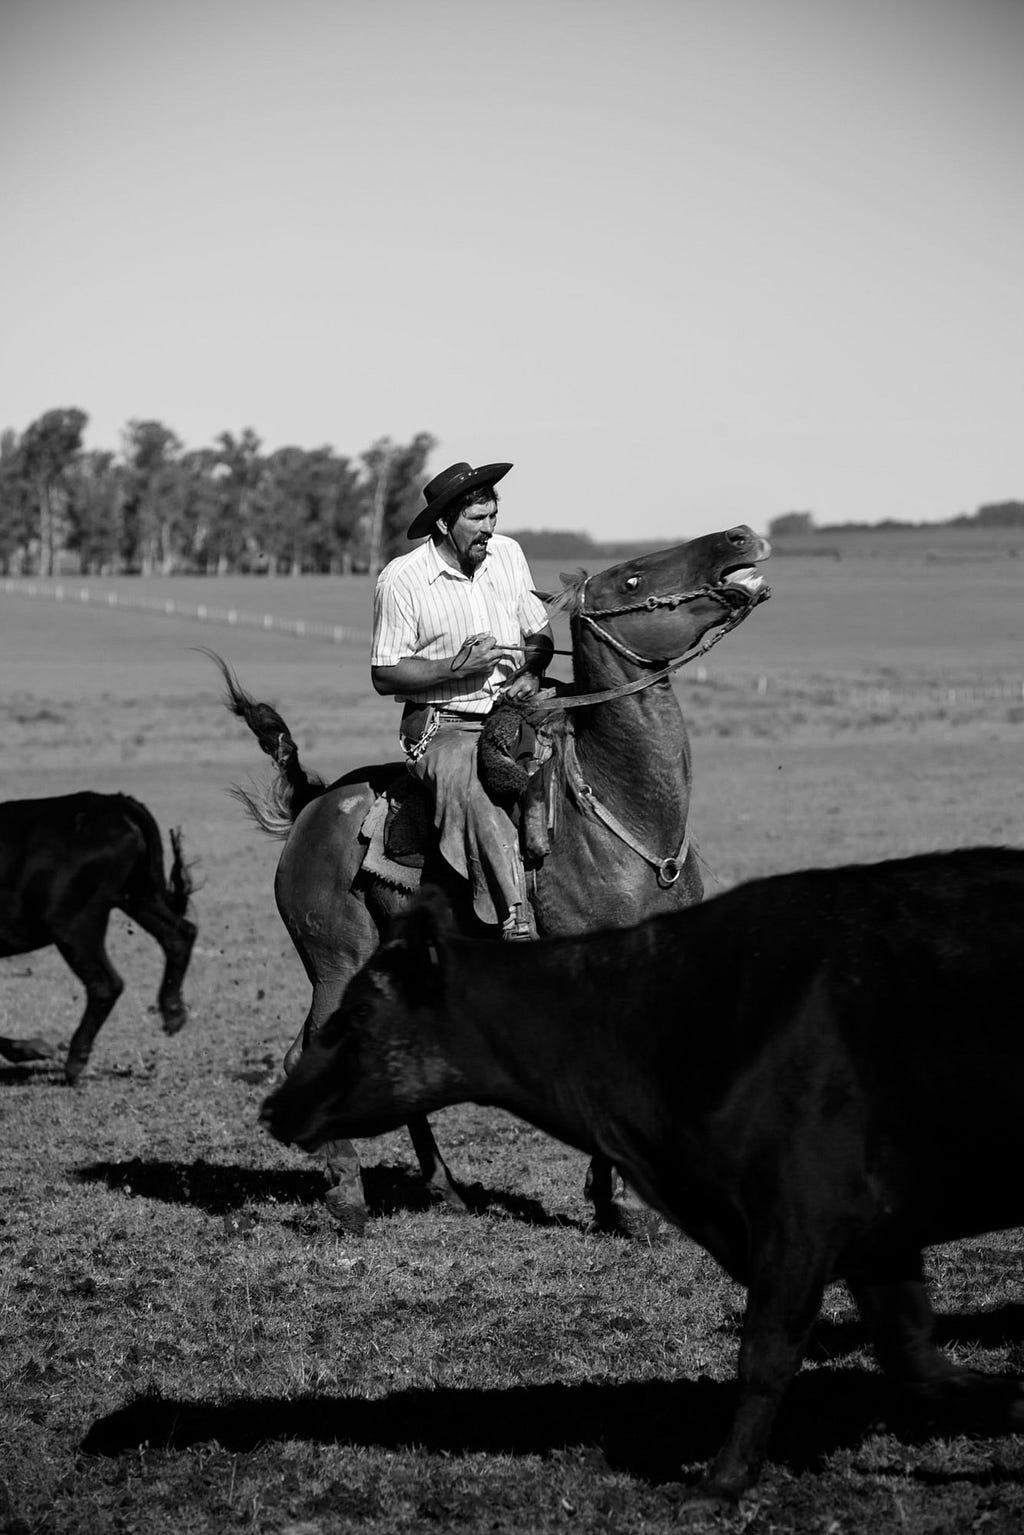 Uruguay’s traditional culture is changing. Not all younger gauchos are content with a hard life in isolated communities when more money can be earned driving a tractor elsewhere.
©James Fisher 2017 All Rights Reserved